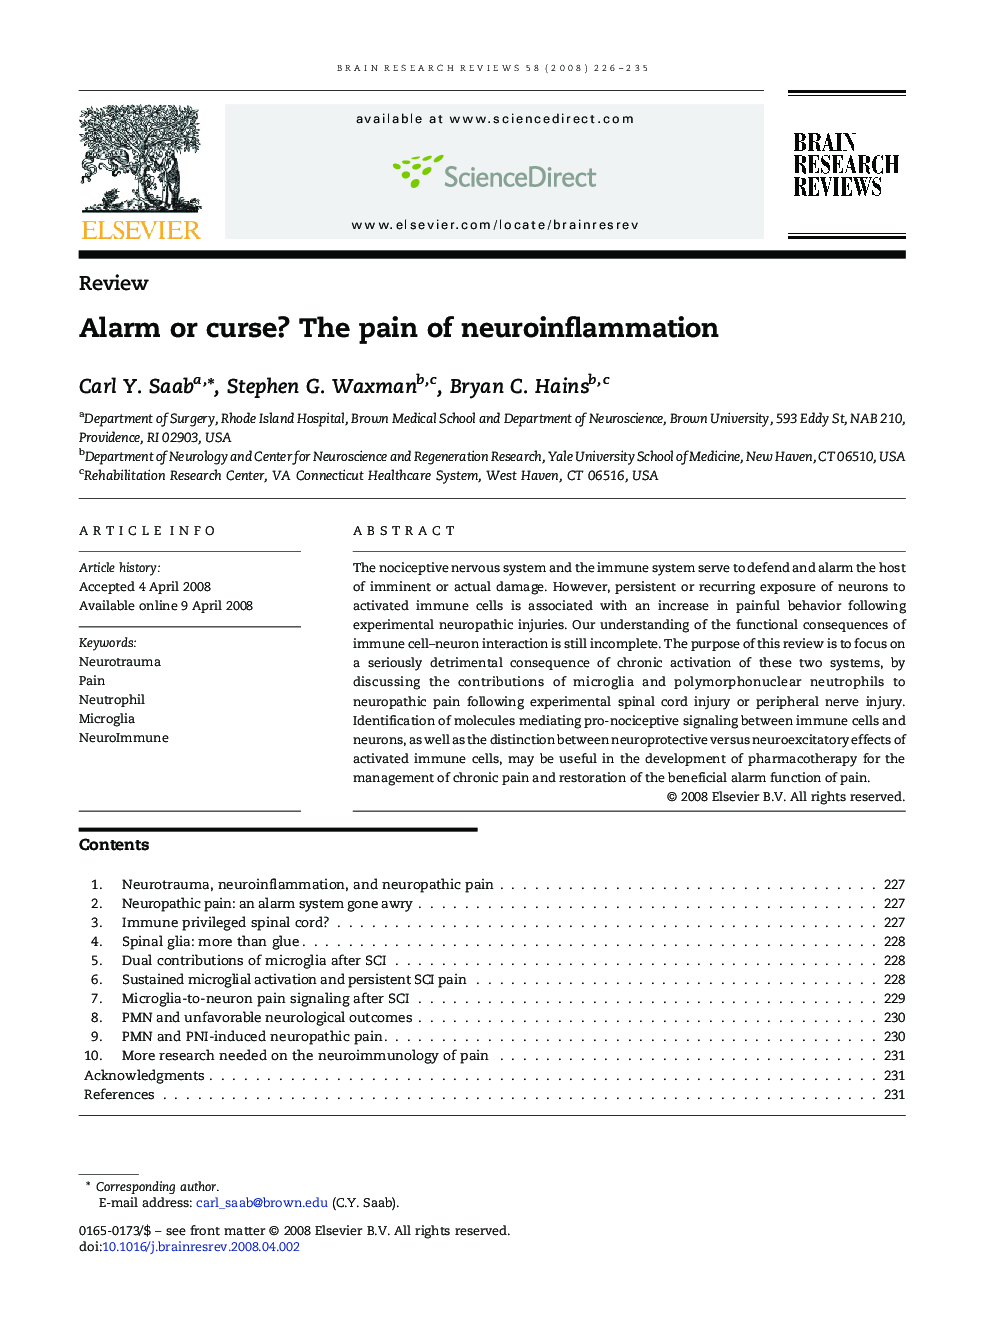 Alarm or curse? The pain of neuroinflammation